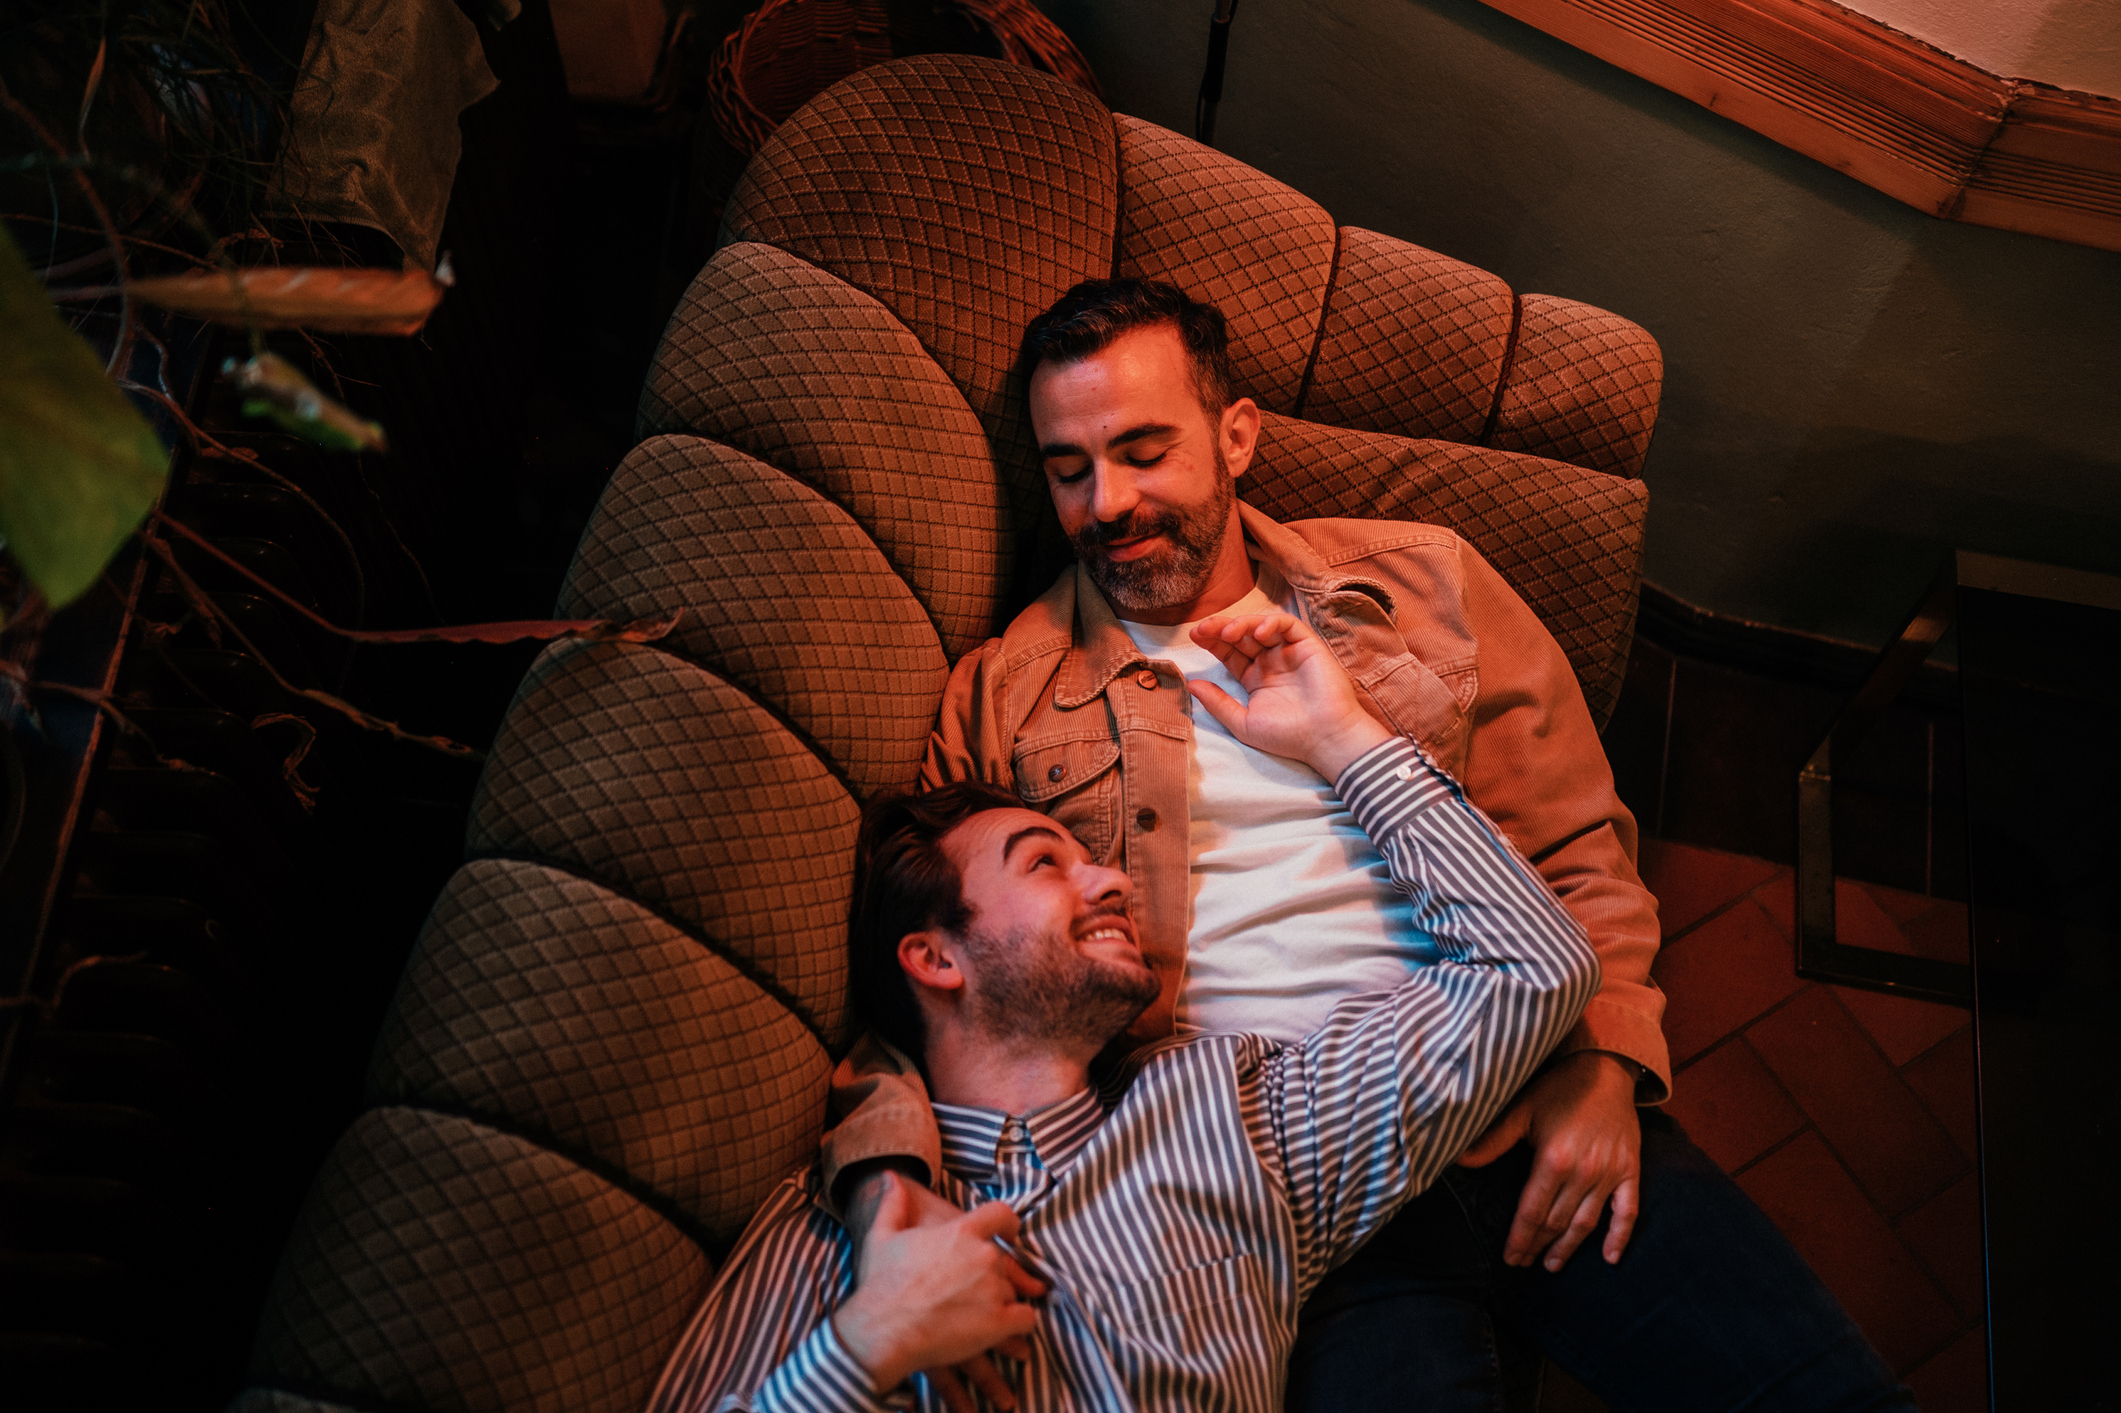 Two men lounging closely on a couch, sharing a moment of affectionate connection